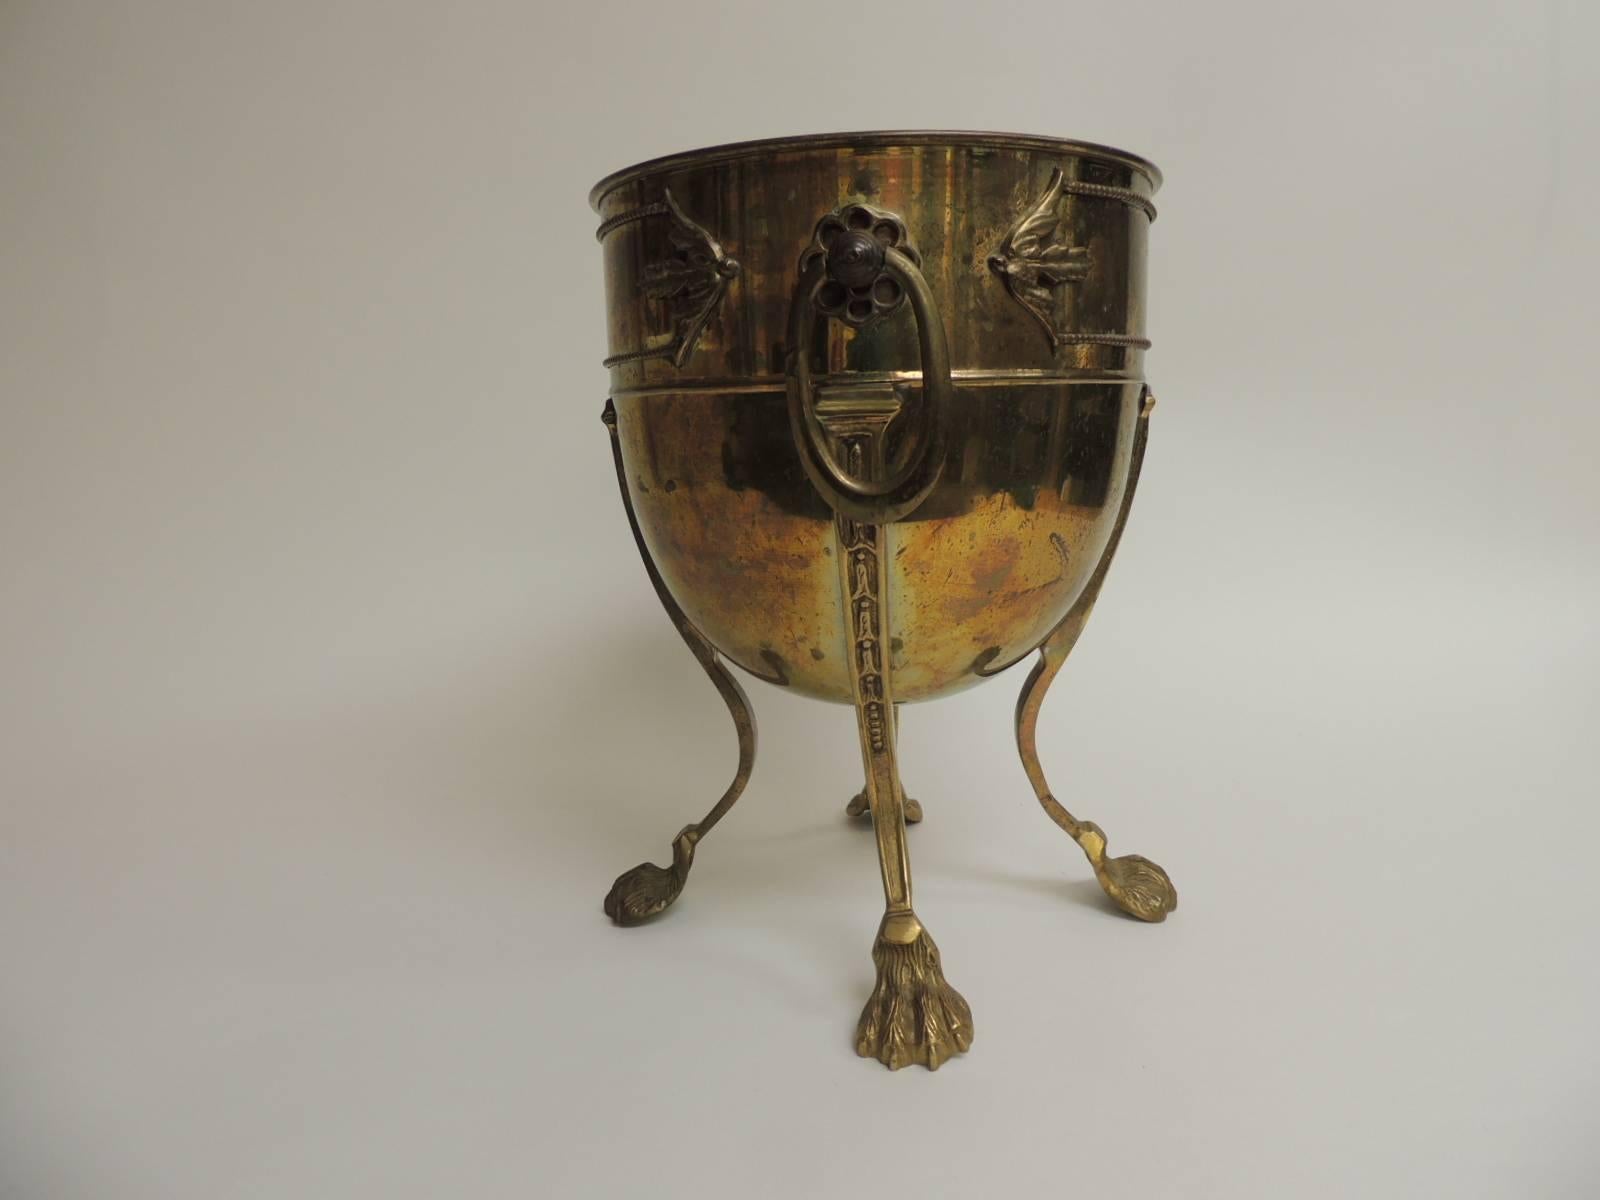 Vintage Indian champagne tall wine cooler. Lions feet with oval hanging handles. Some decorations on top of the cooler. Nice patina. No rust inside or out.
Note: Fits two bottles.